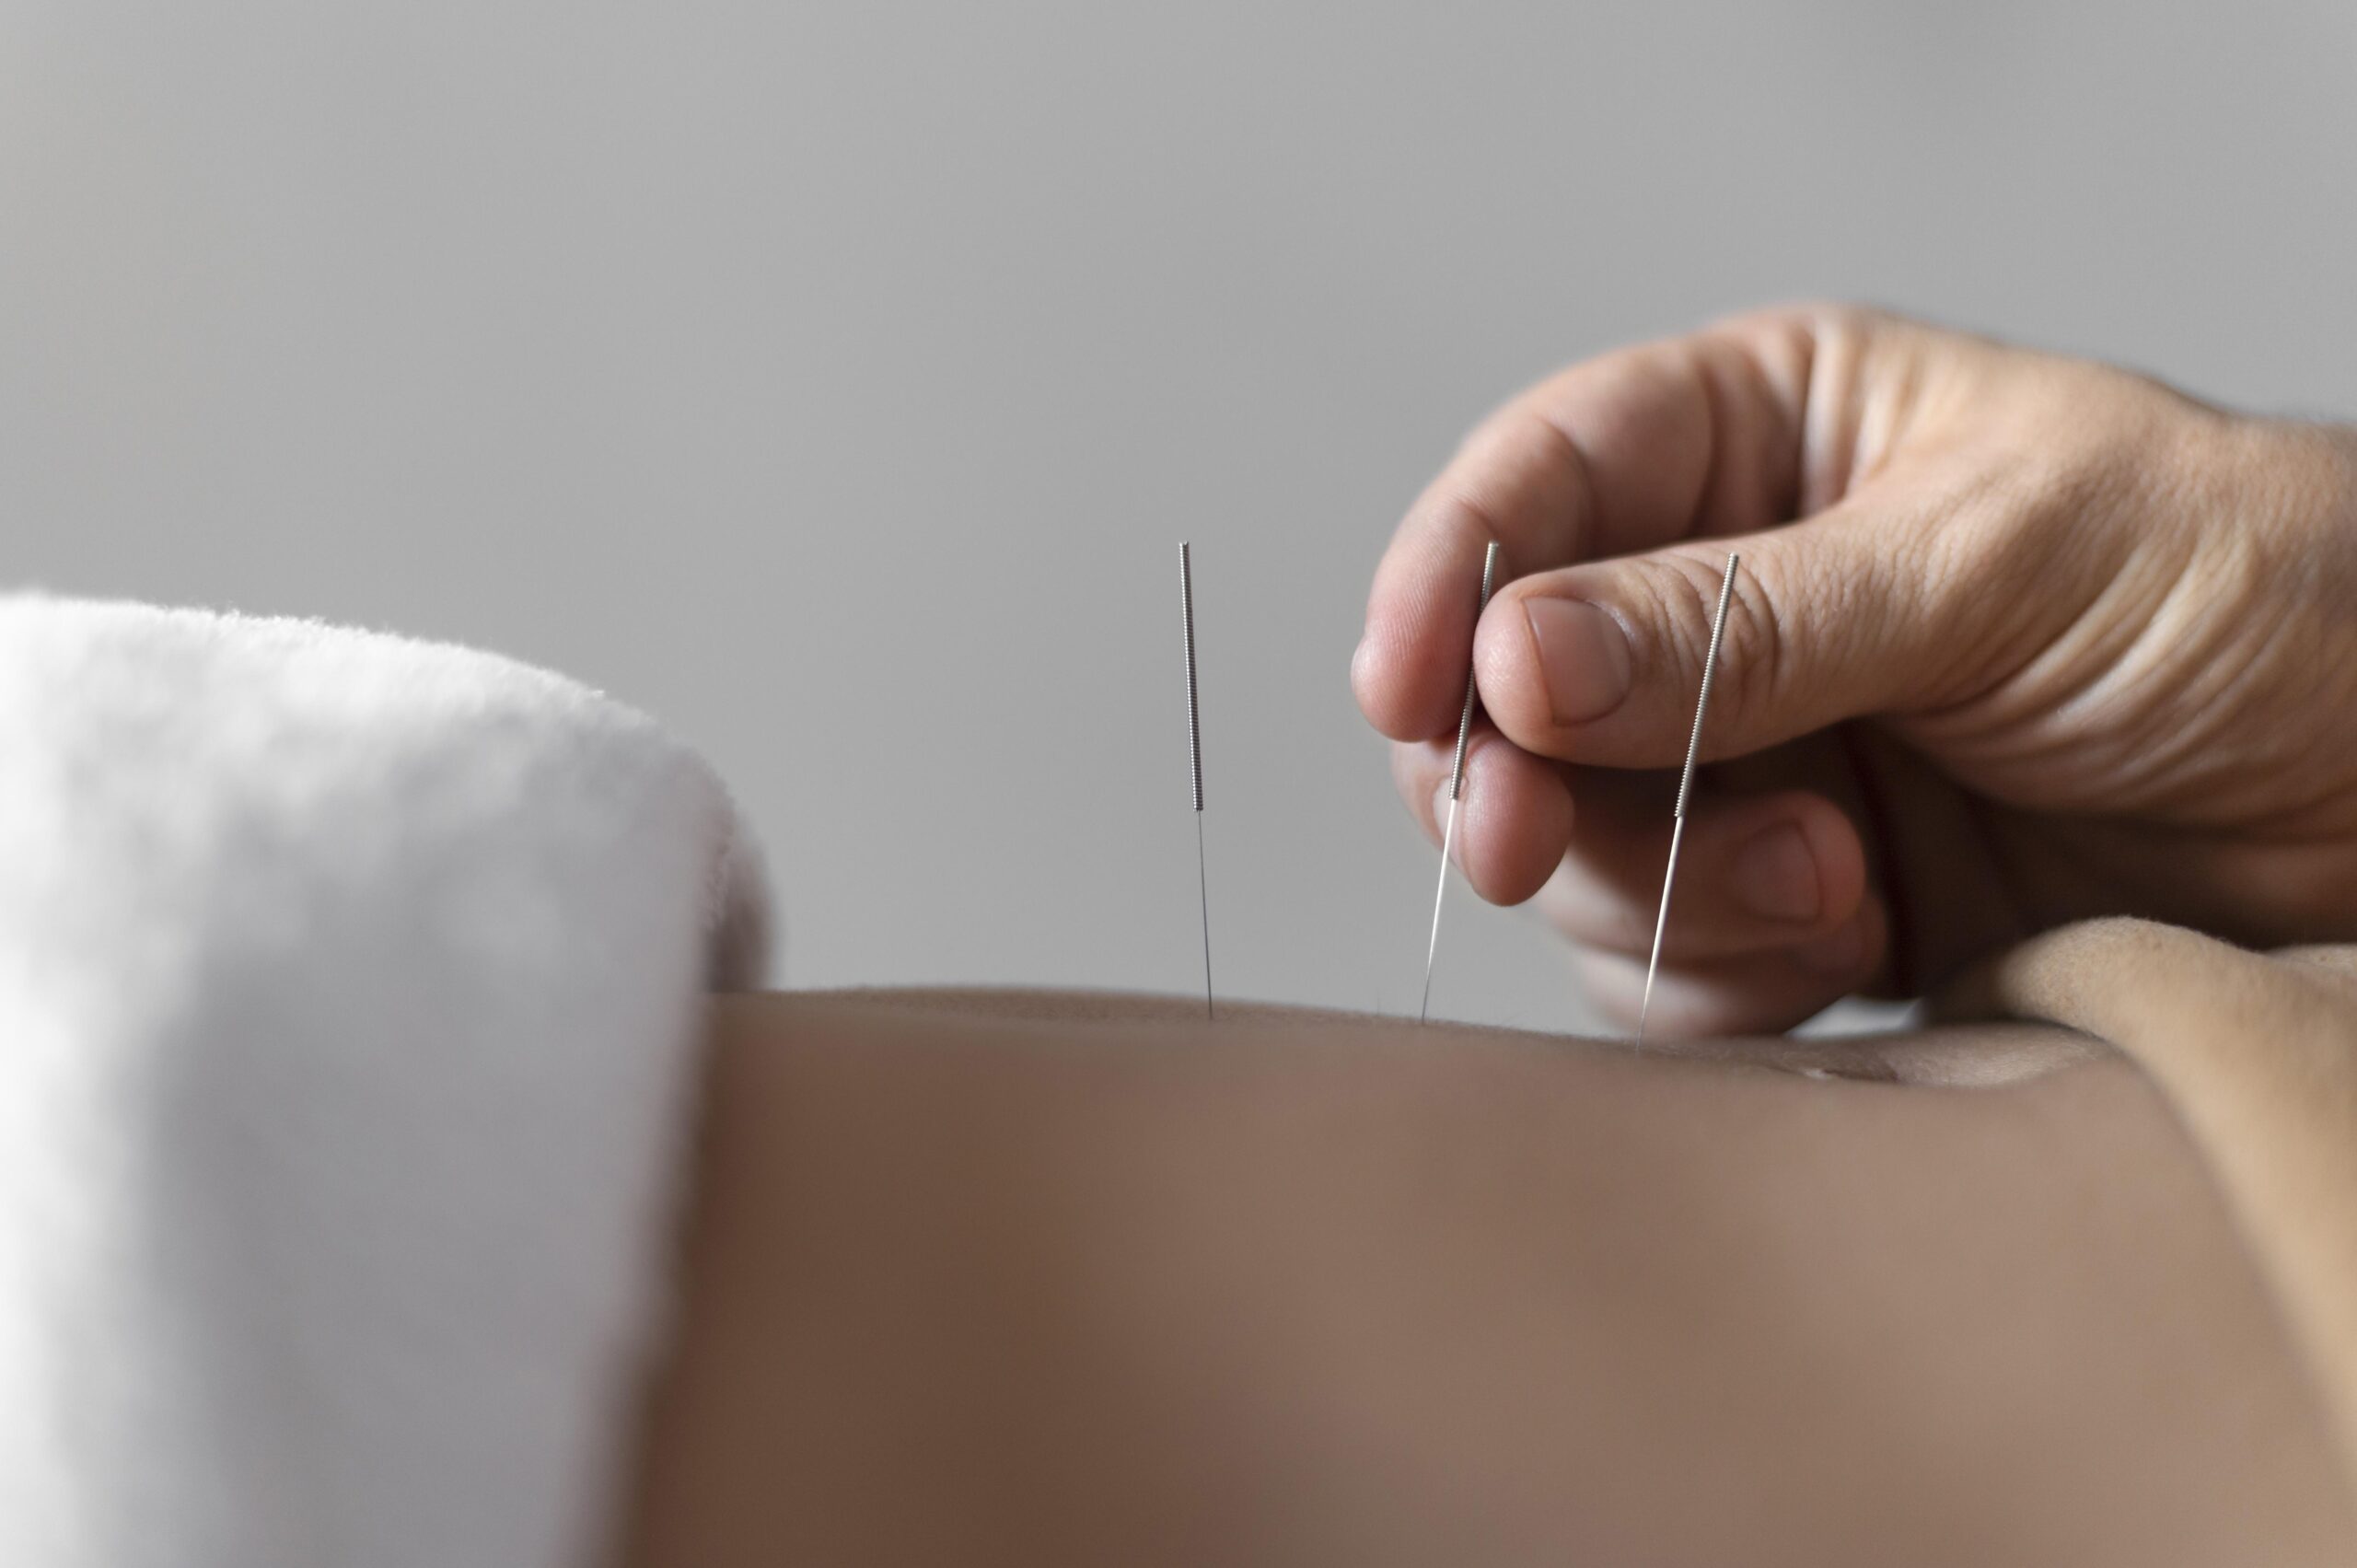 Acupuncture: What Is, Mechanism of Action, and Risks